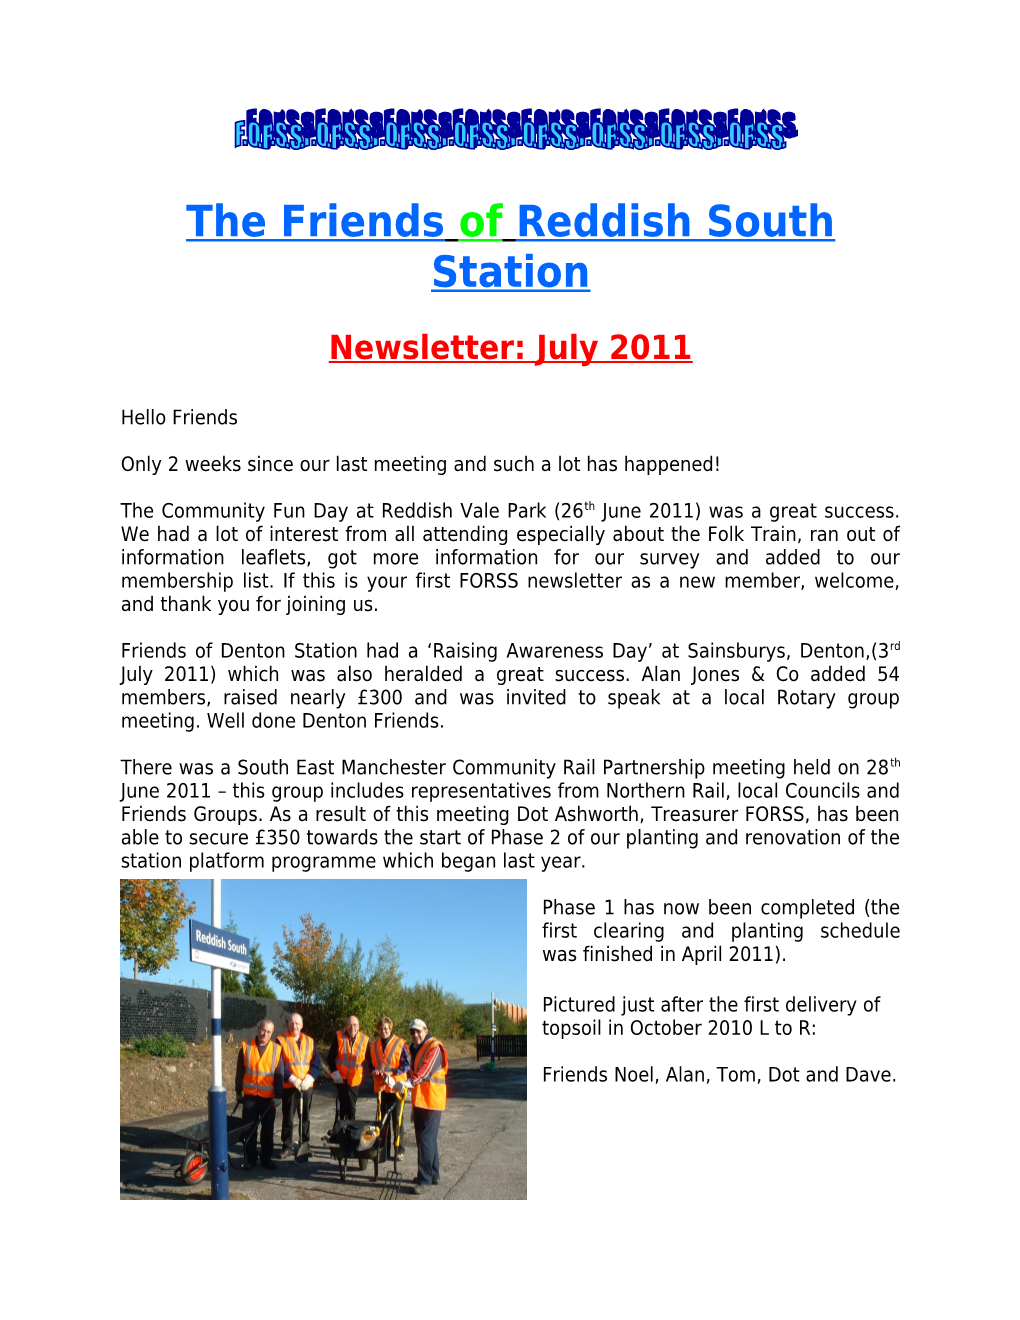 The Friends of Reddish South Station